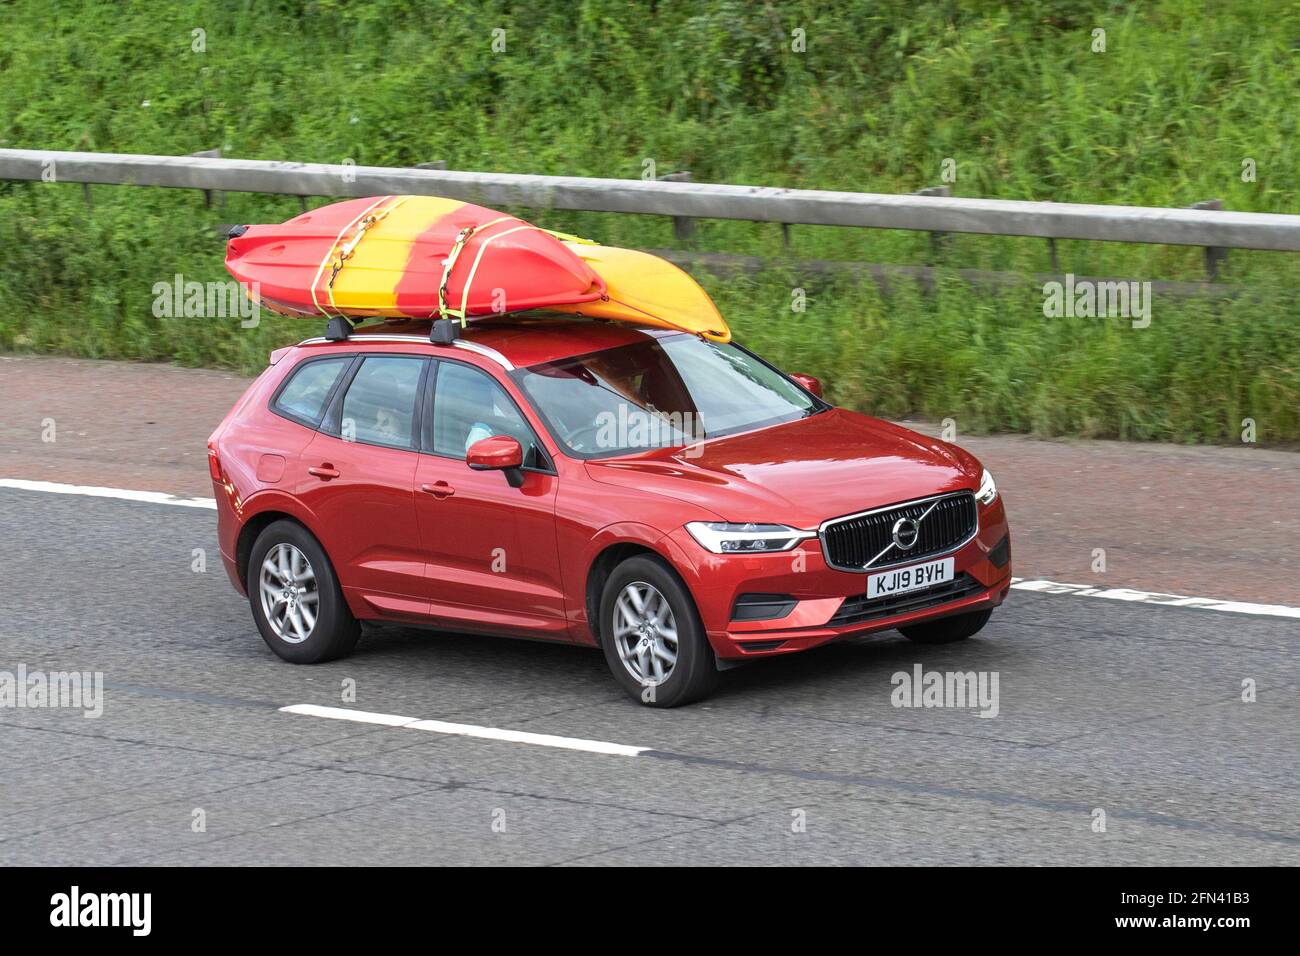 2019 (19) red Volvo Xc Momentum D4 Auto; Vehicular traffic, moving vehicles, cars, vehicle driving on UK roads, motors, motoring on the M6 motorway highway UK road network. Stock Photo